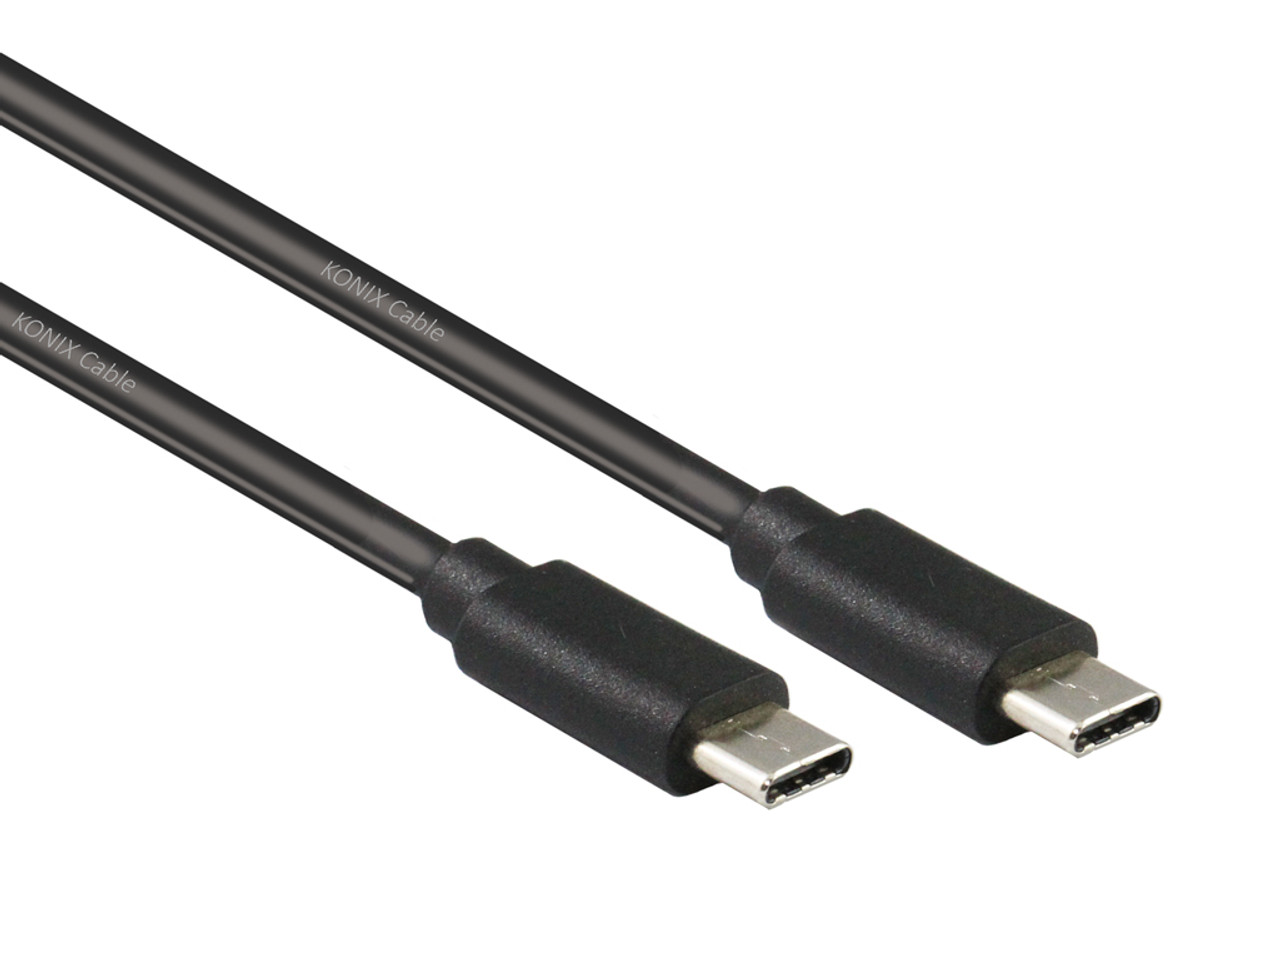 3M USB 3.1 GEN1 Type-C Male to Type-C Male Cable Supports 5Gbps Speed